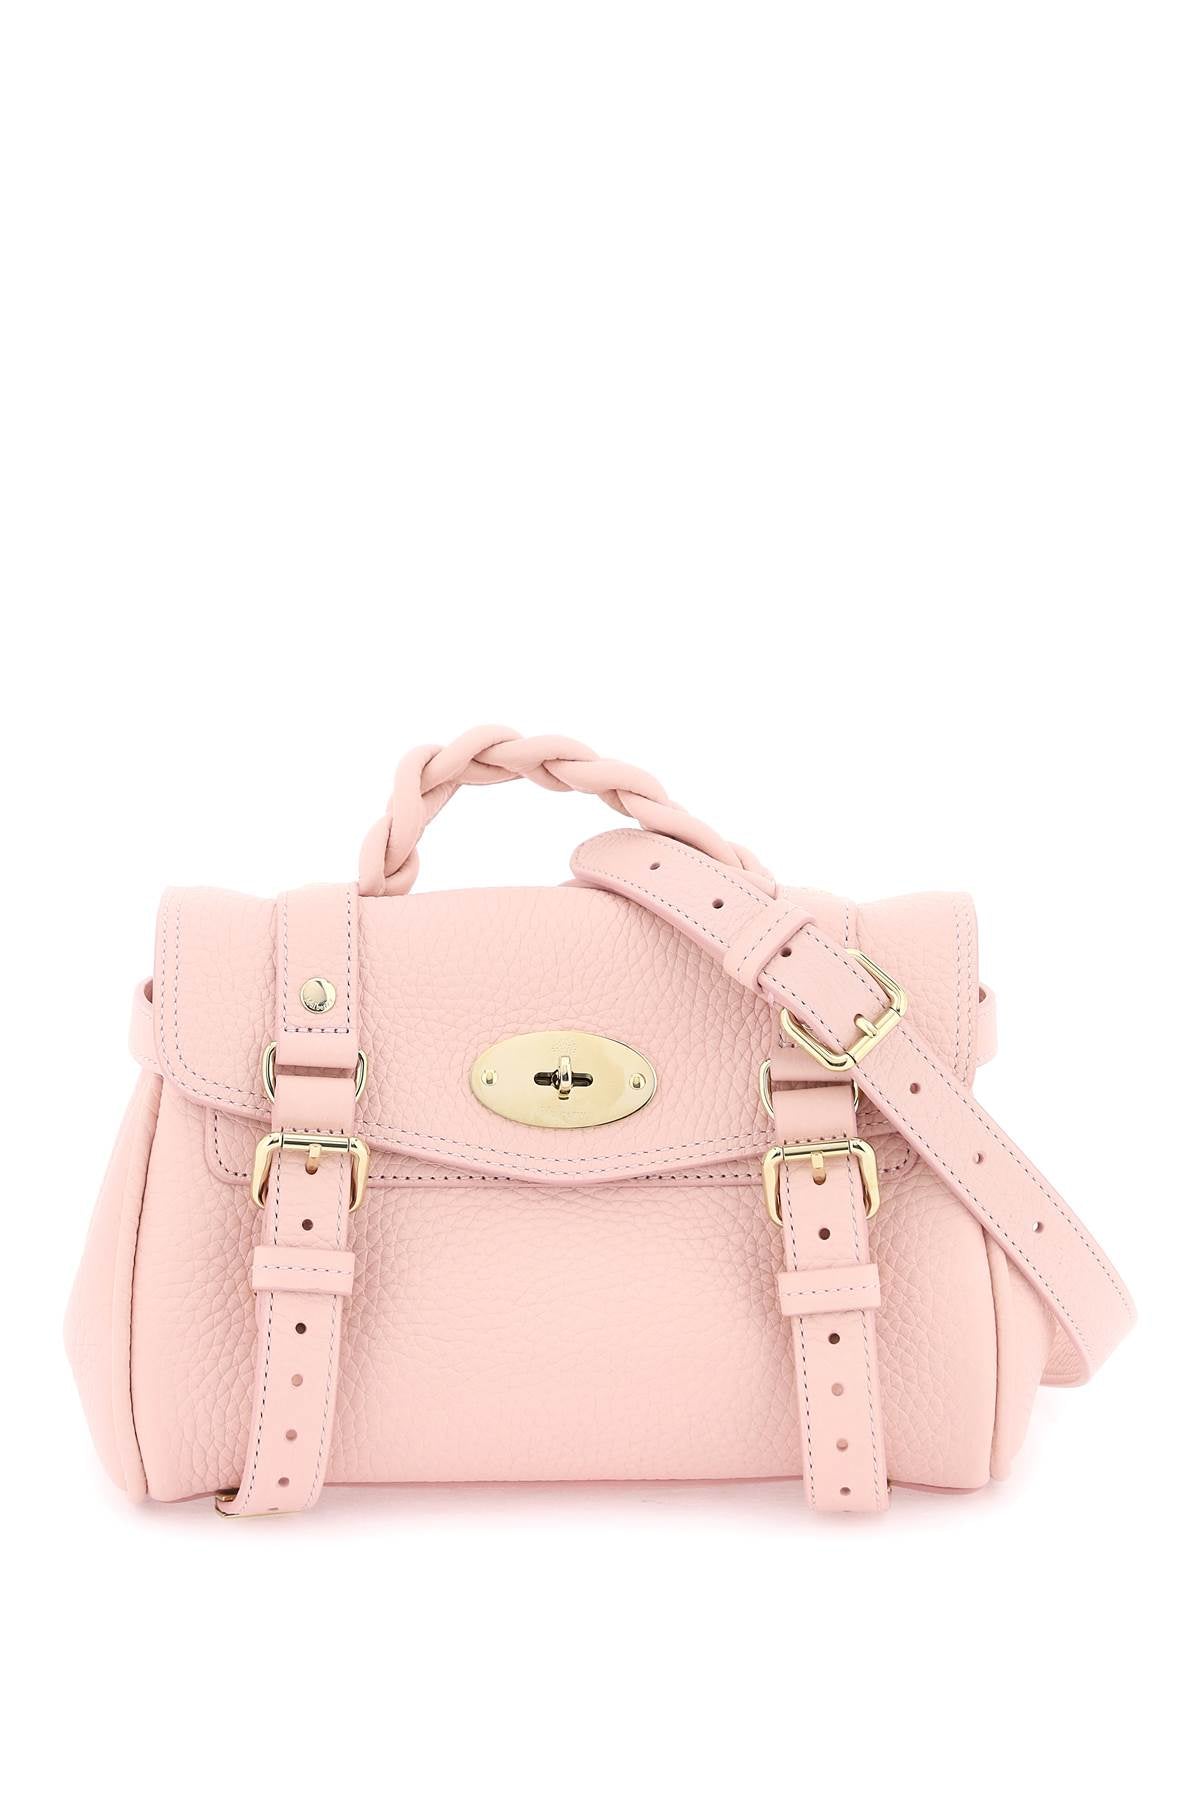 Shop Mulberry Mini Alexa Grained Leather Handbag With Braided Handle And Gold-tone Accents In Pink